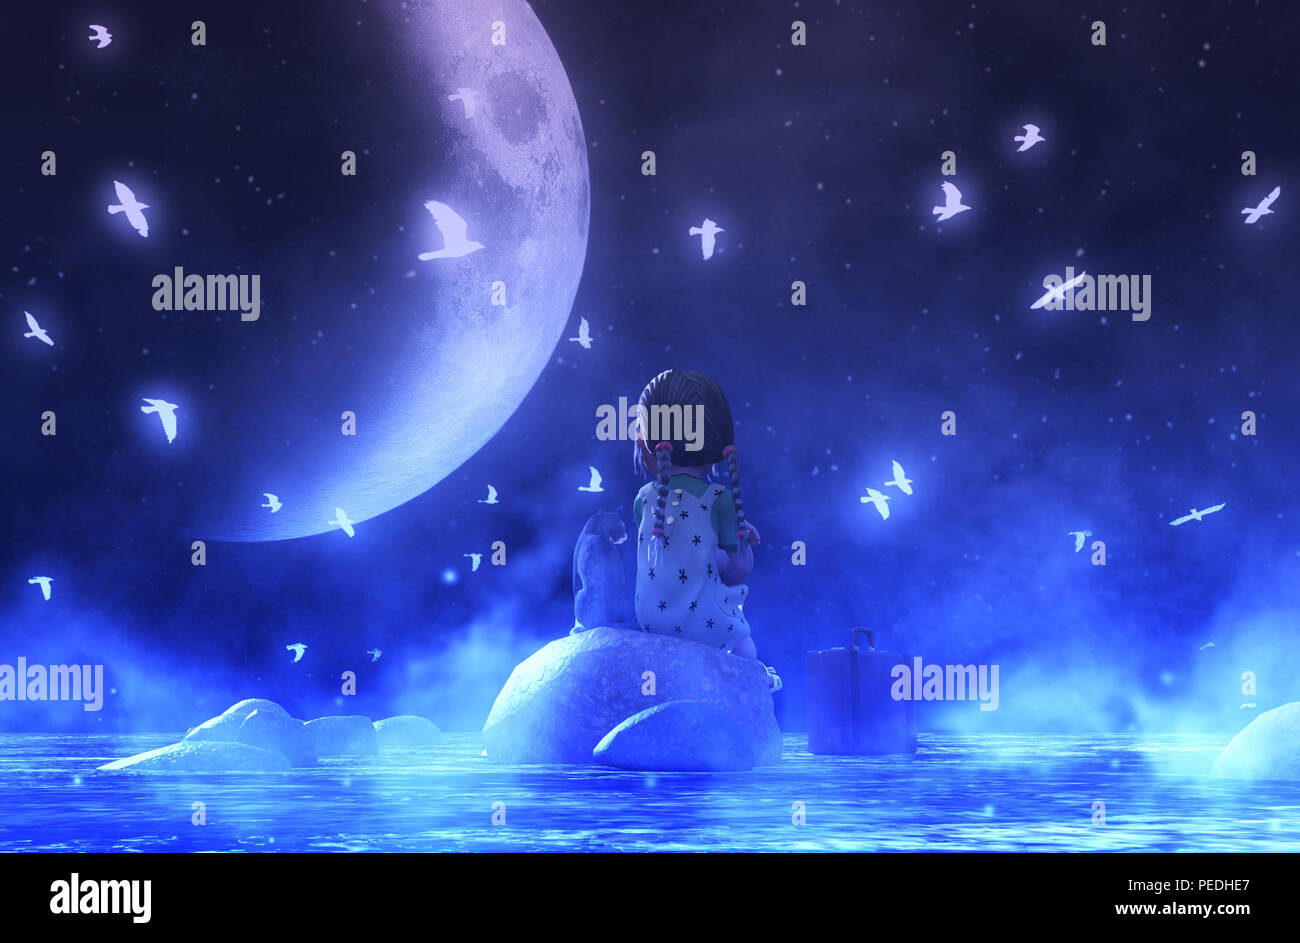 Girl Sitting Outdoors With Her Cat In Starry Night Fantasy Sky 3d Illustration Conceptual Background Stock Photo Alamy